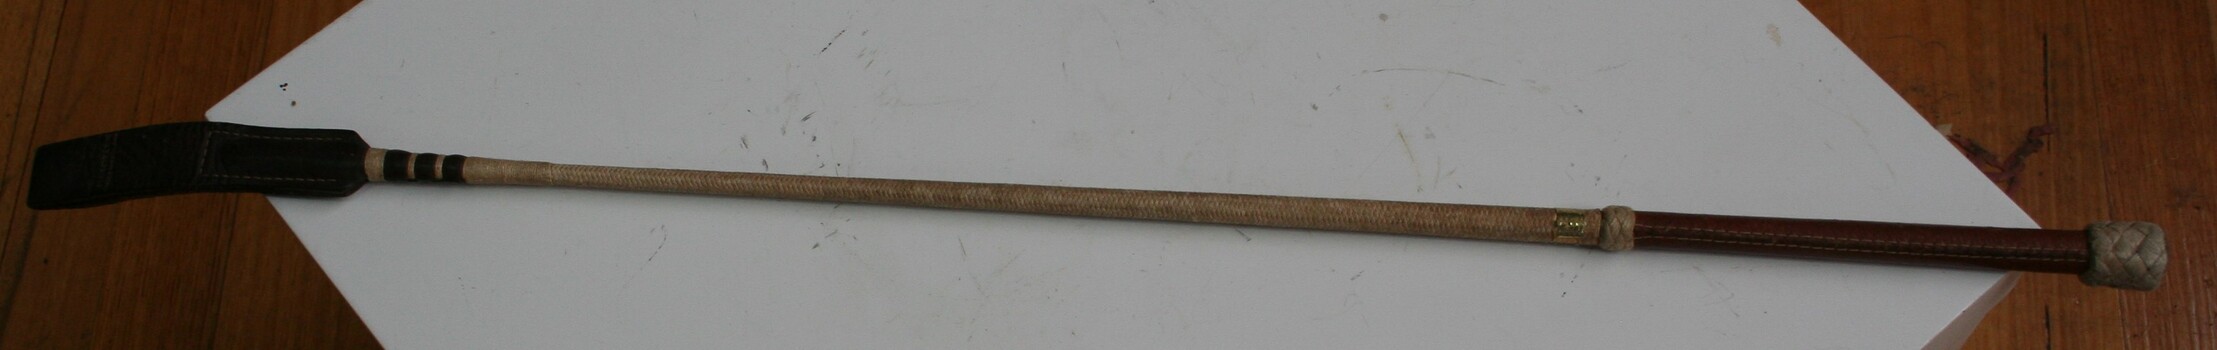 Crop used by riders. Cane shaft with leather handle  and leather tip.